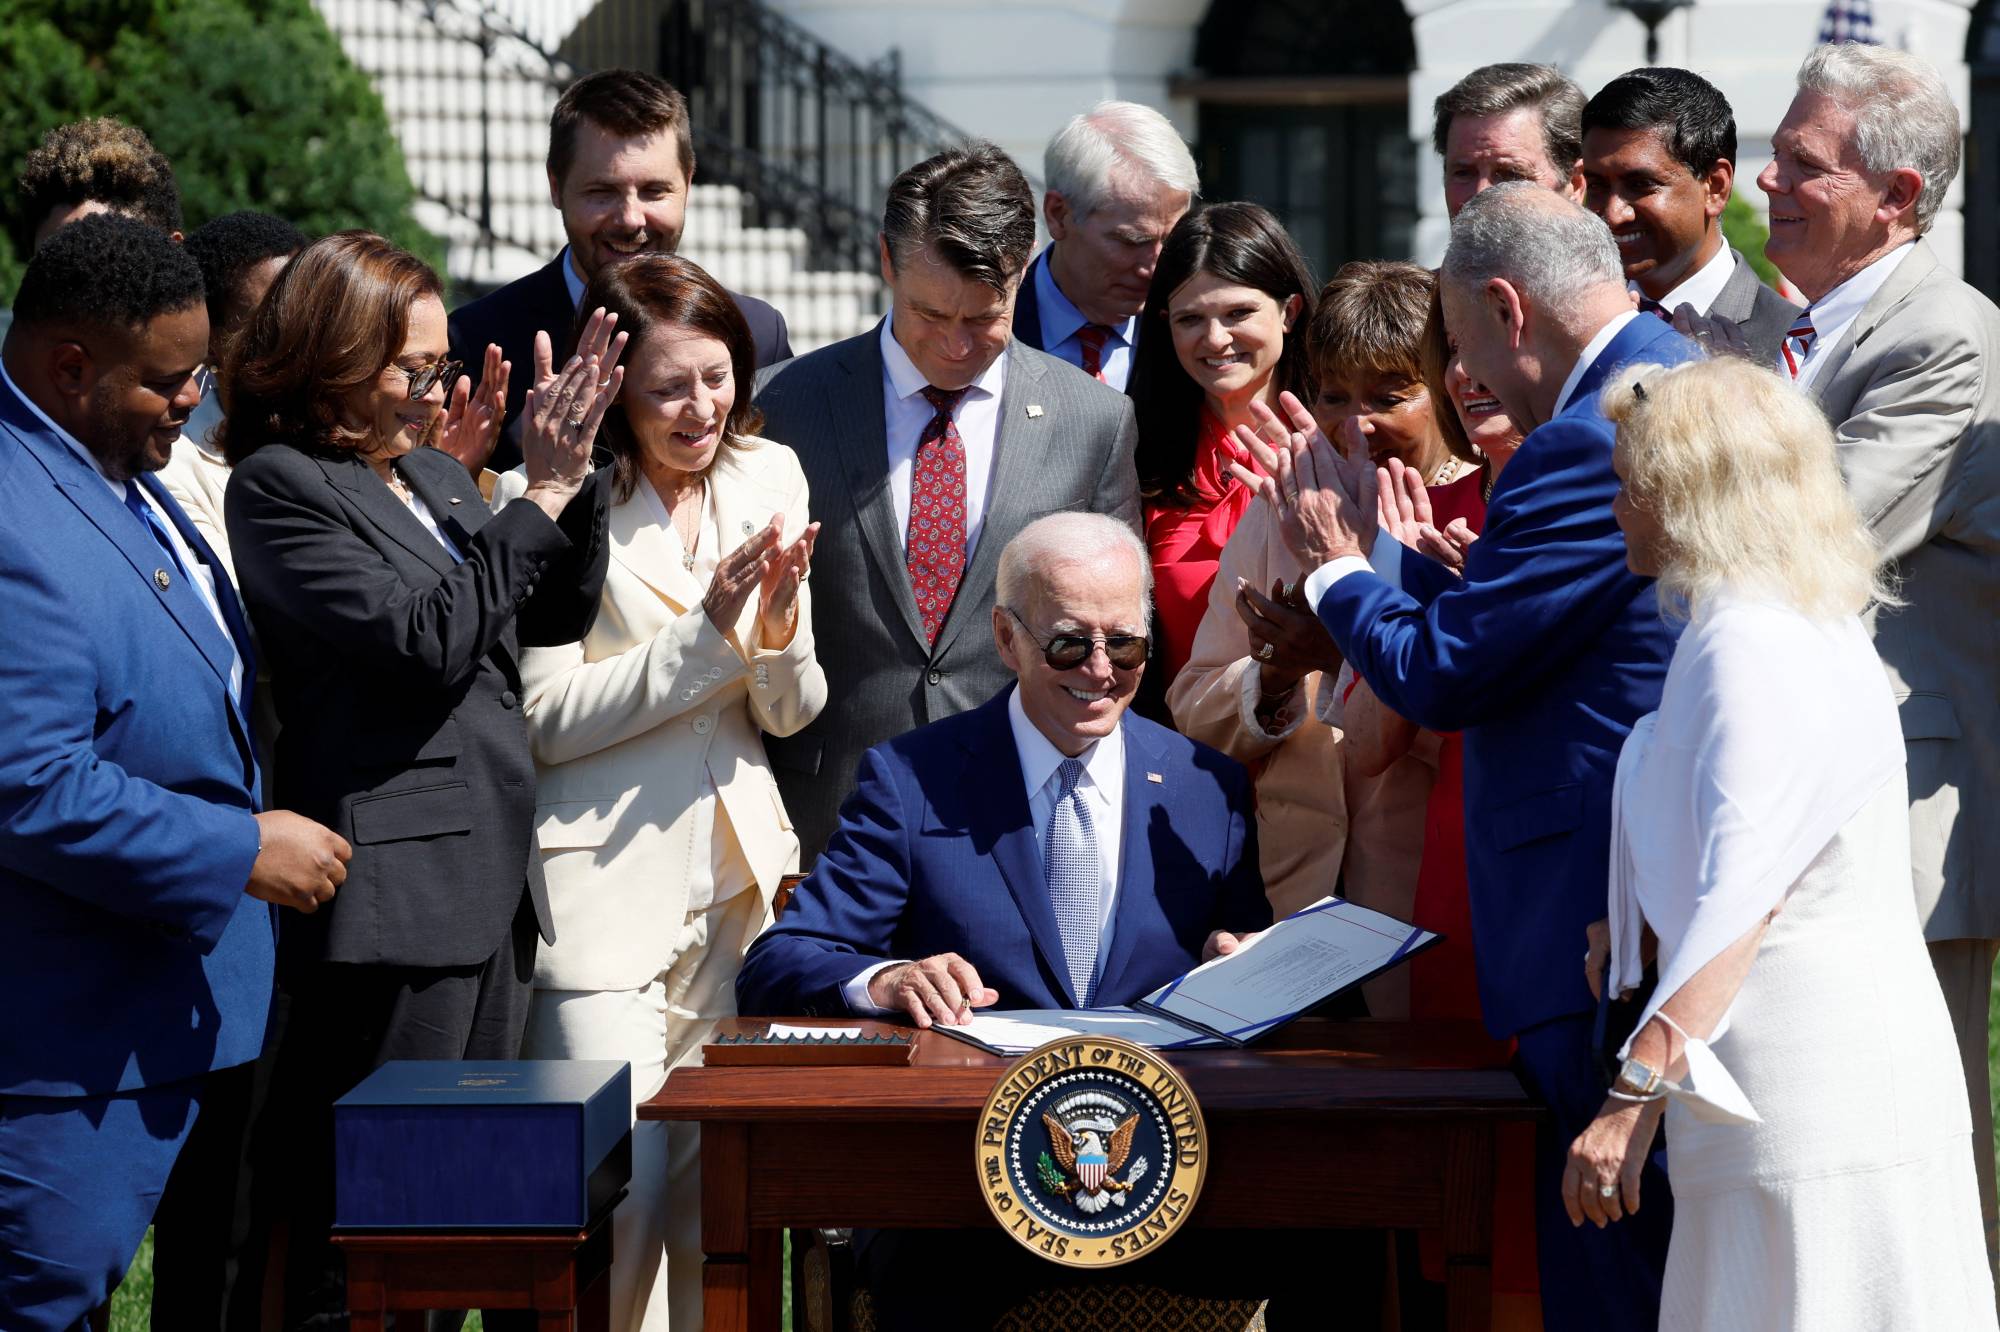 U.S. President Joe Biden signs the Chips and Science Act of 2022, at the White House on Aug. 9. | REUTERS